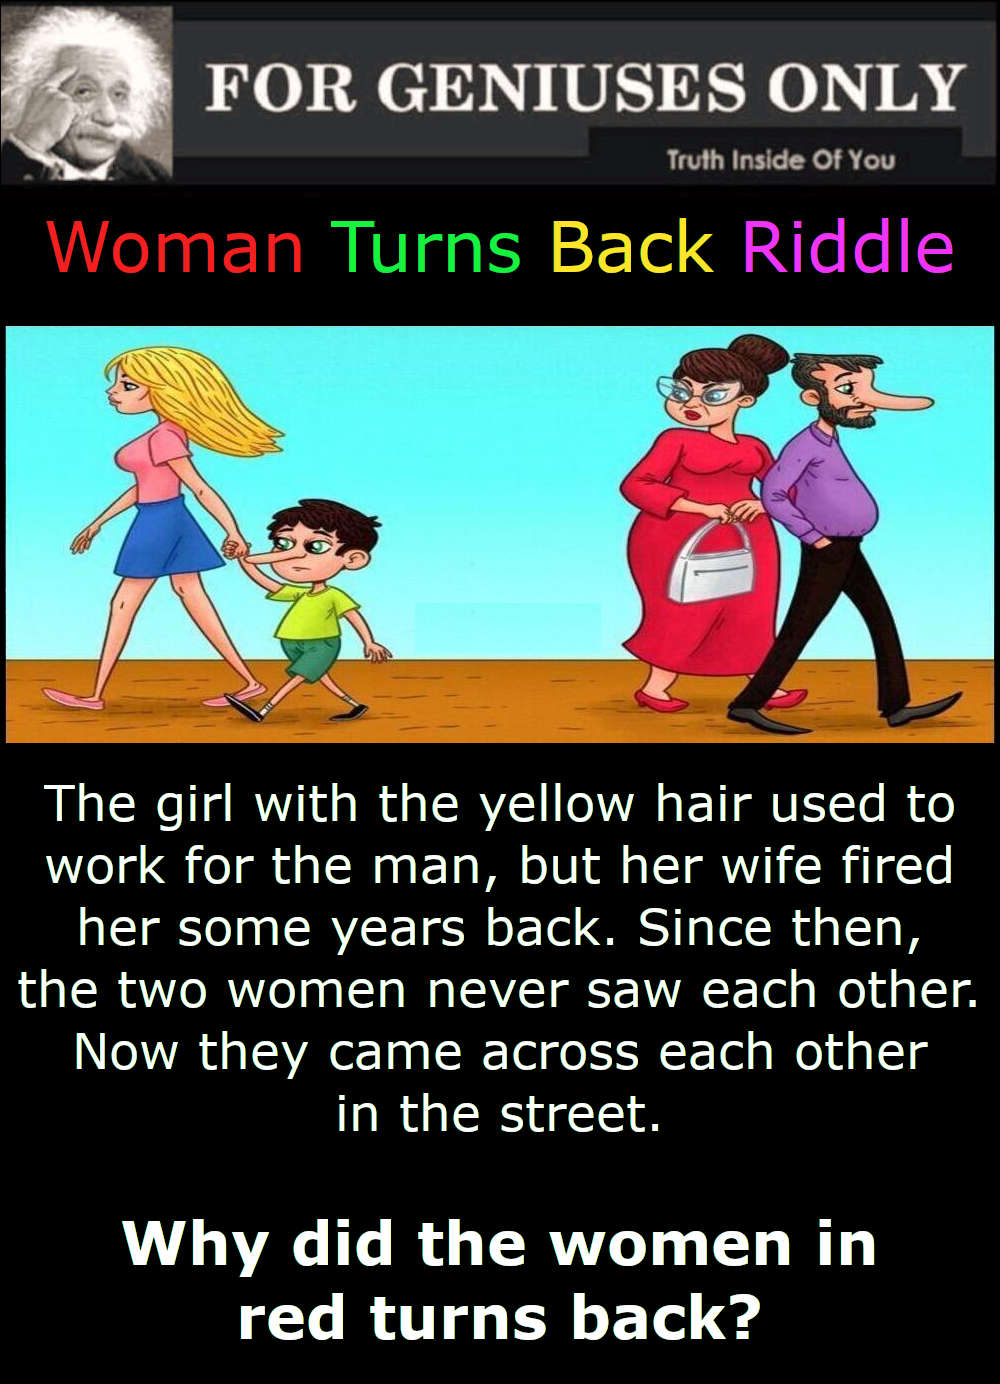 Why did the women in red turns back